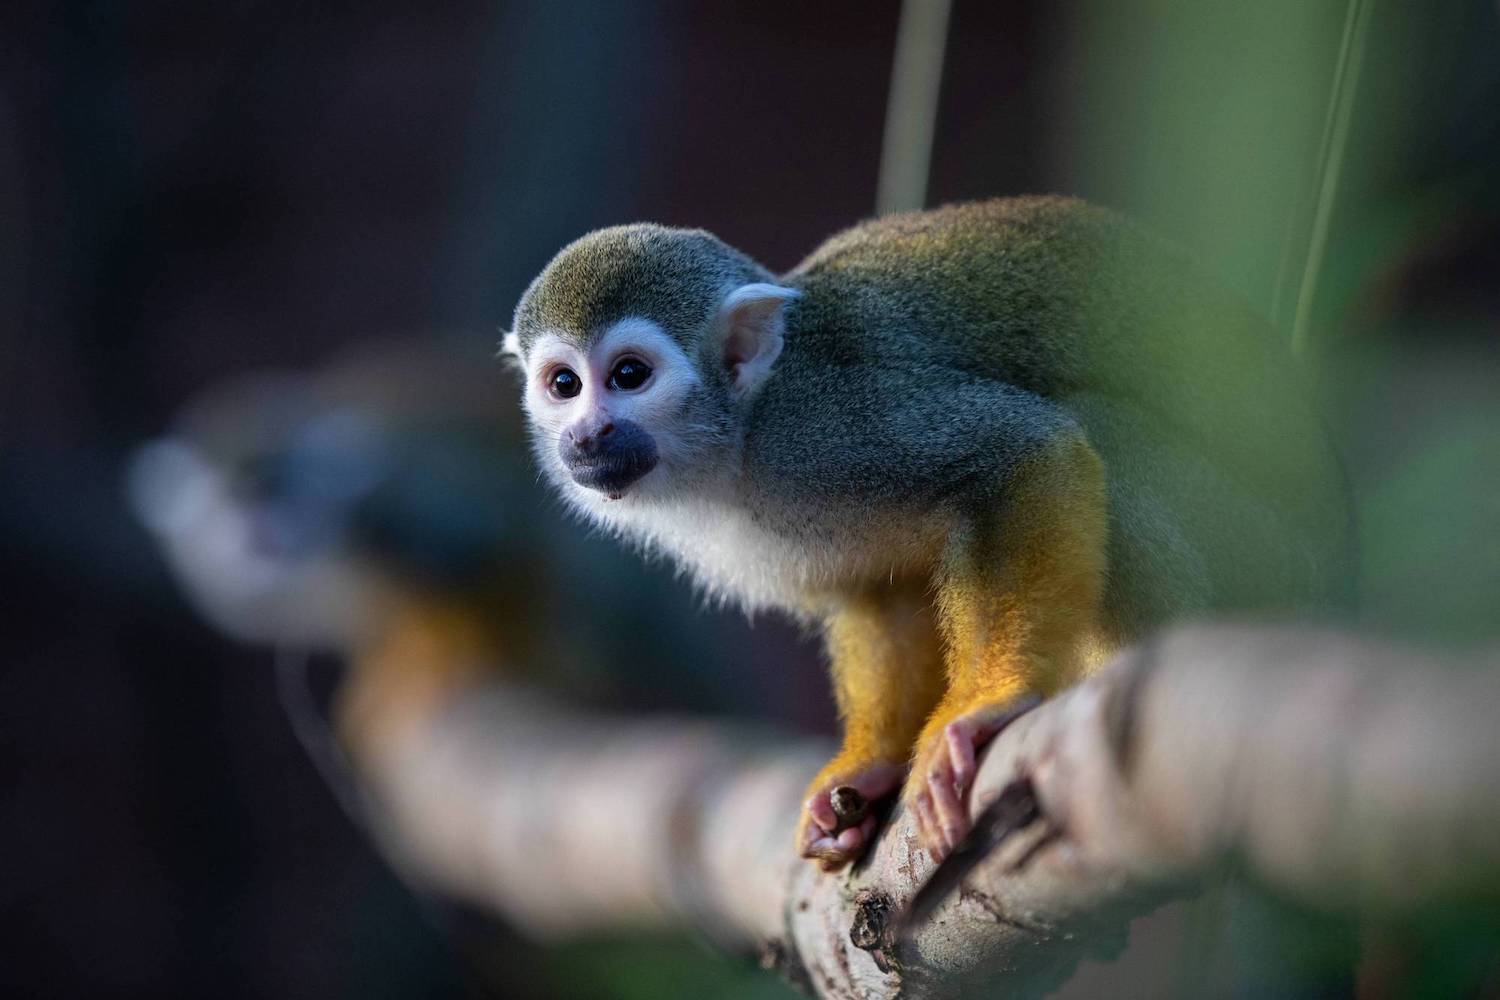 an image of a squirrel monkey on a tree branch